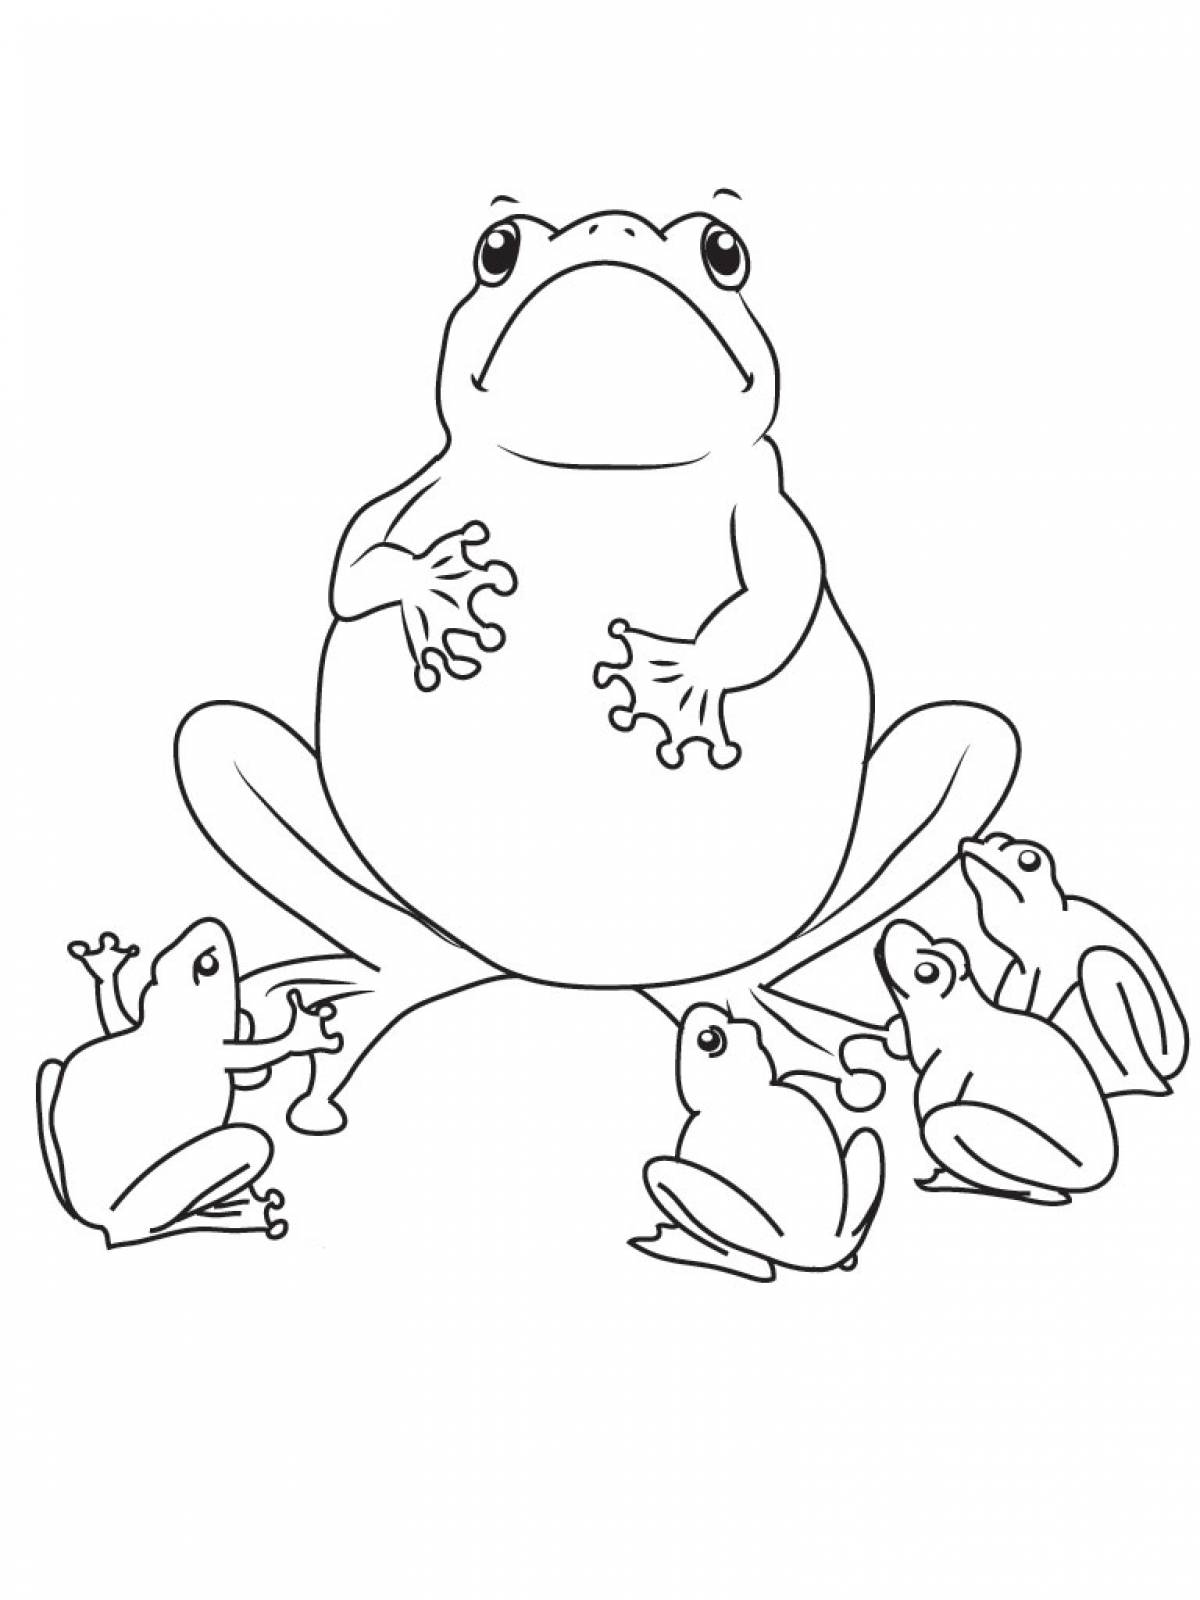 Frogs listen to a story